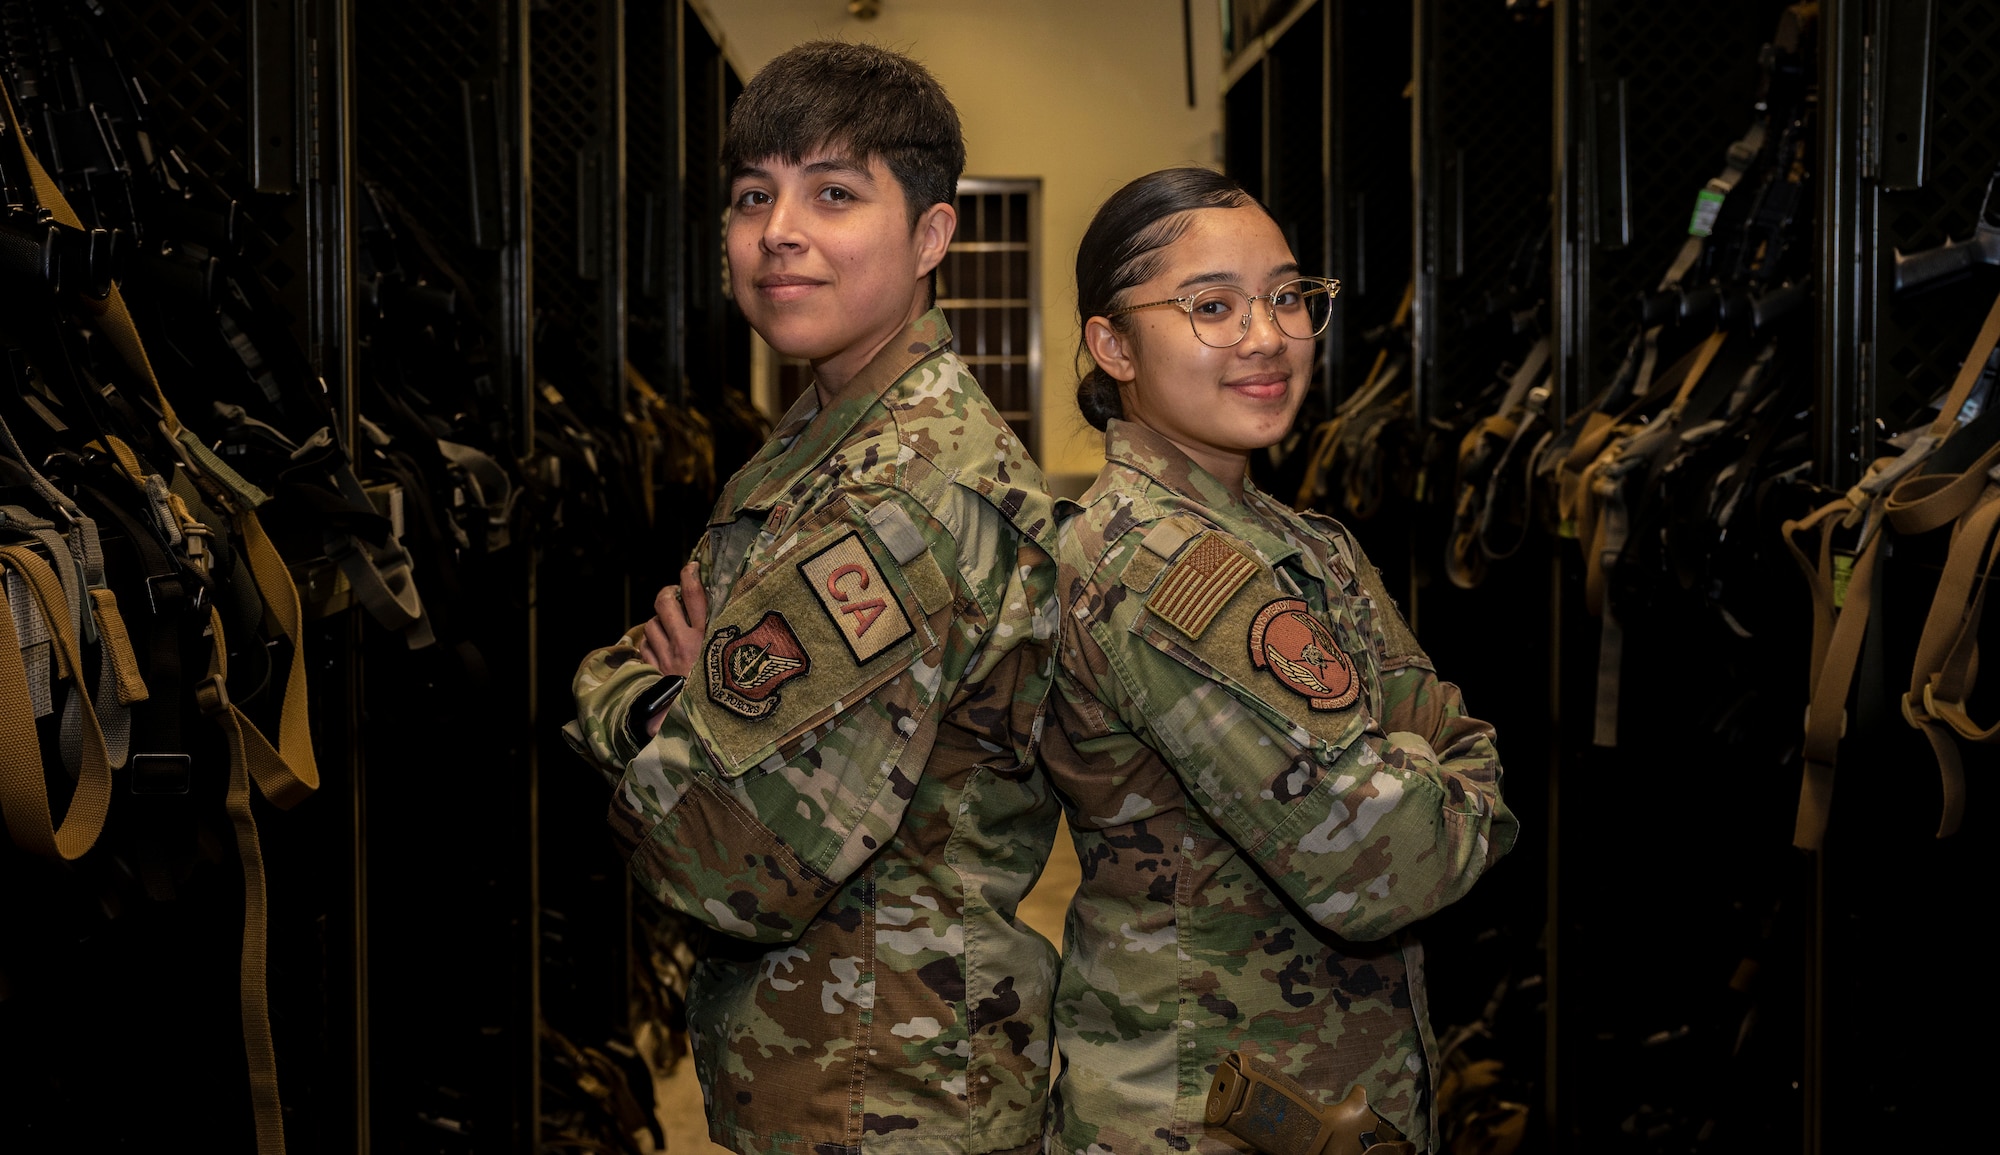 U.S. Air Force Staff Sgt. Glenda Francis (left), 51st Security Forces Squadron, NCO in-charge of armory and Senior Airman Amron Barcinas, 51st SFS armorer, pose for a photo in celebration of Women’s History Month at Osan Air Base, Republic of Korea, March 27, 2023.